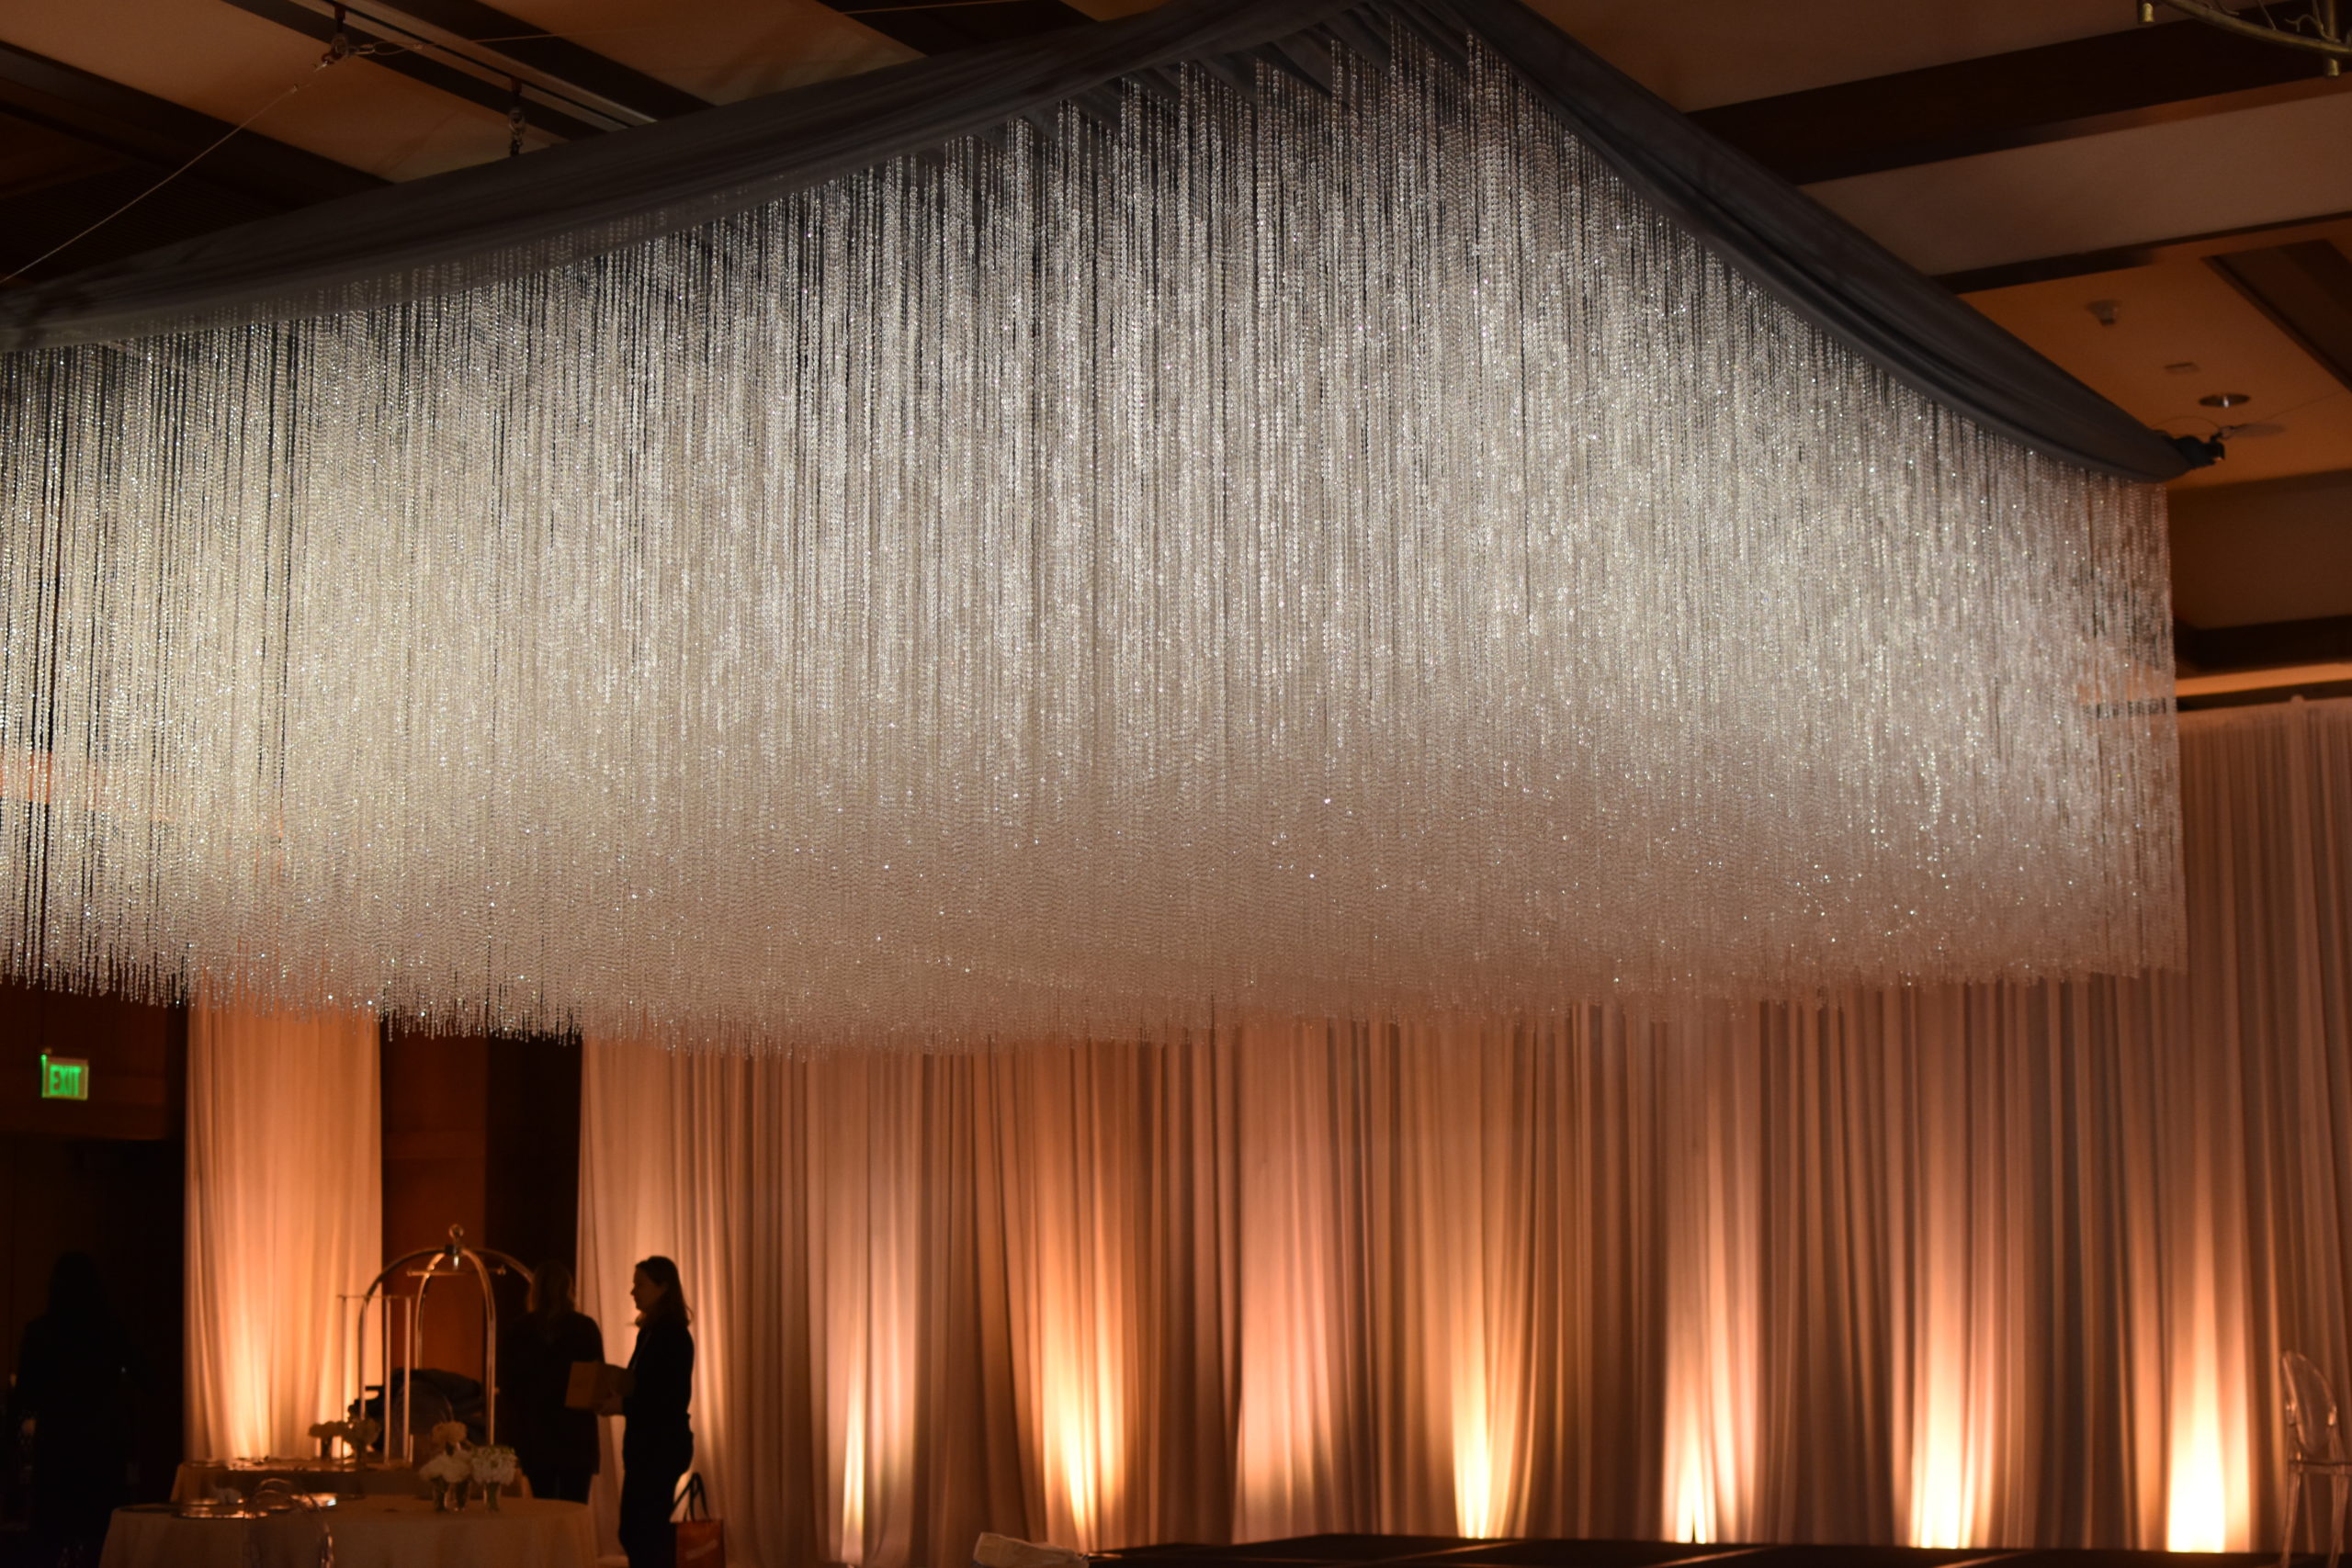 16′ x 16′ Faux Crystal Installation with Lighting